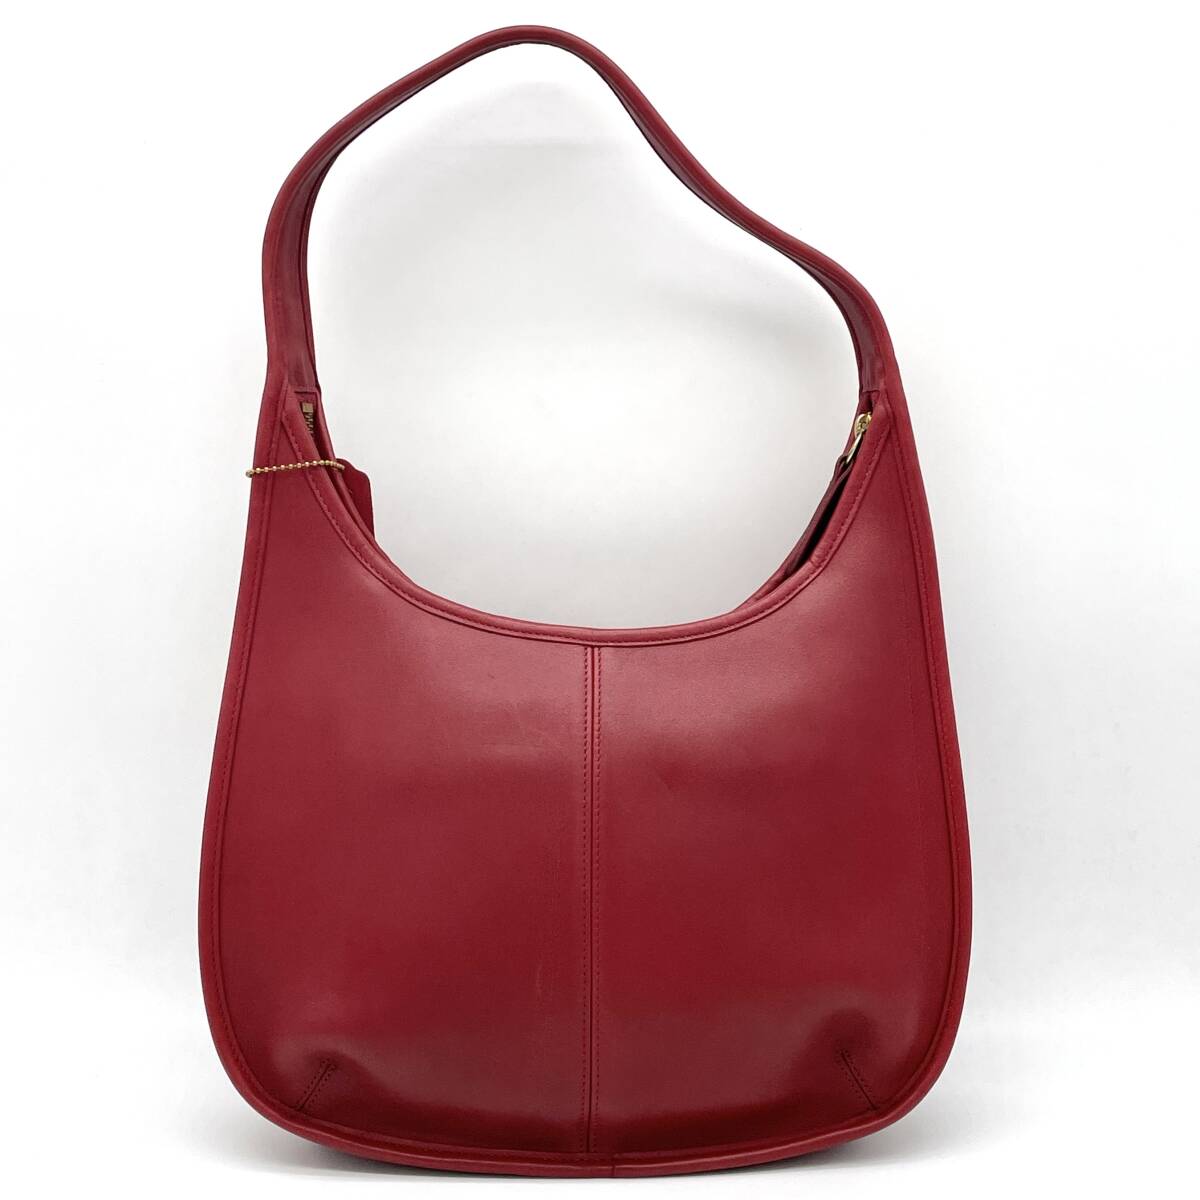 1 jpy ultimate beautiful goods COACH Old Coach car f leather L go horn bo- one shoulder bag shoulder .. red red half moon 